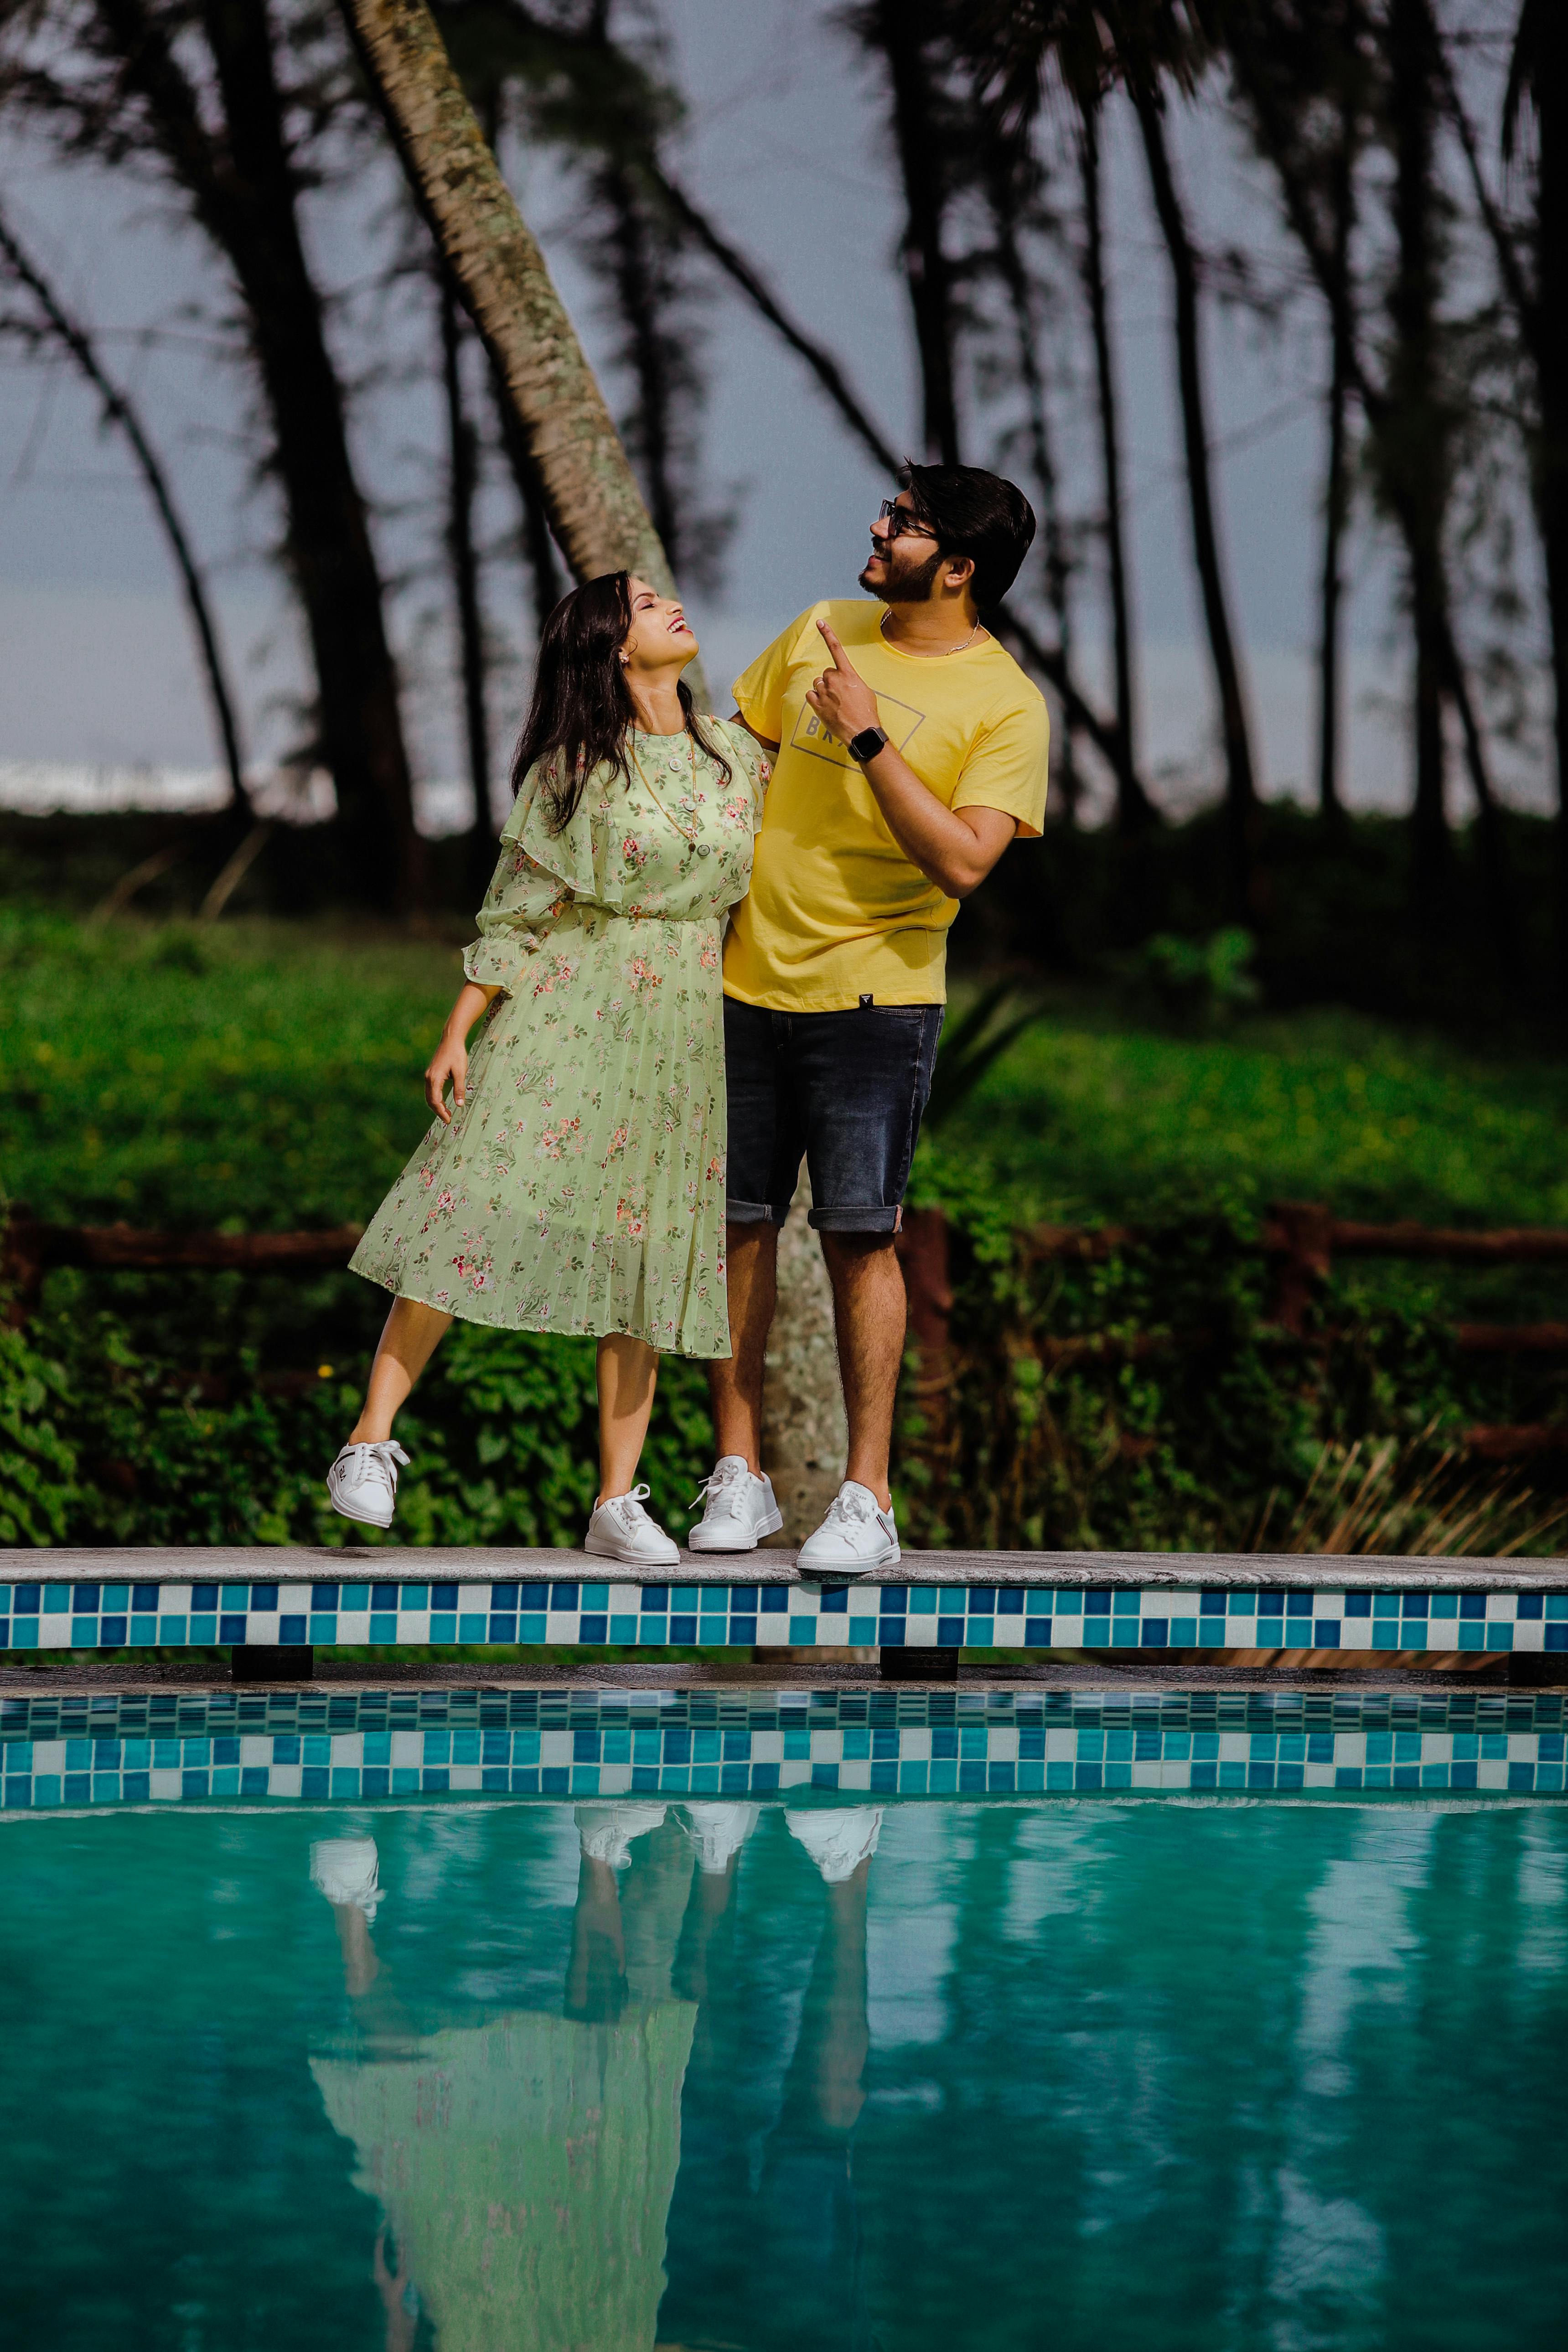 Man and Woman in Swimming Pool · Free Stock Photo